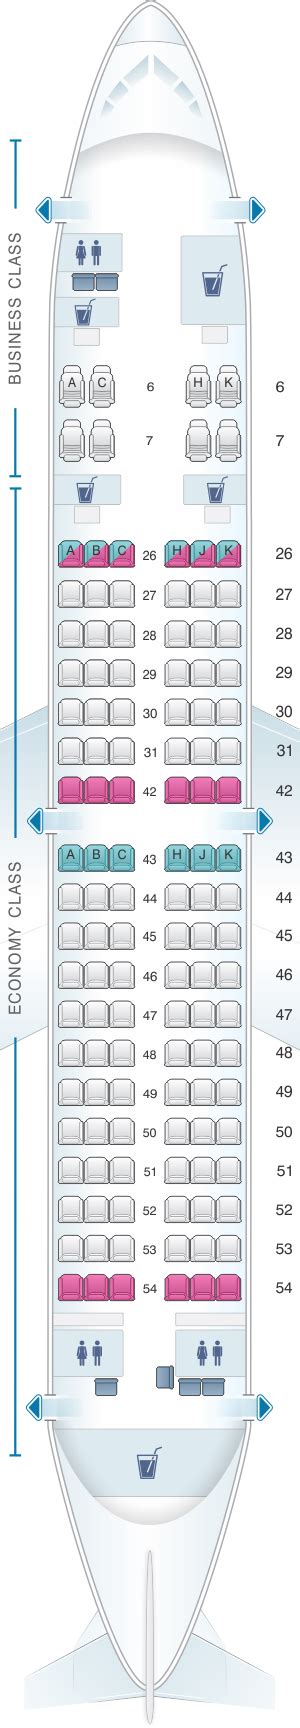 Seat Map Royal Brunei Airlines Airbus A319